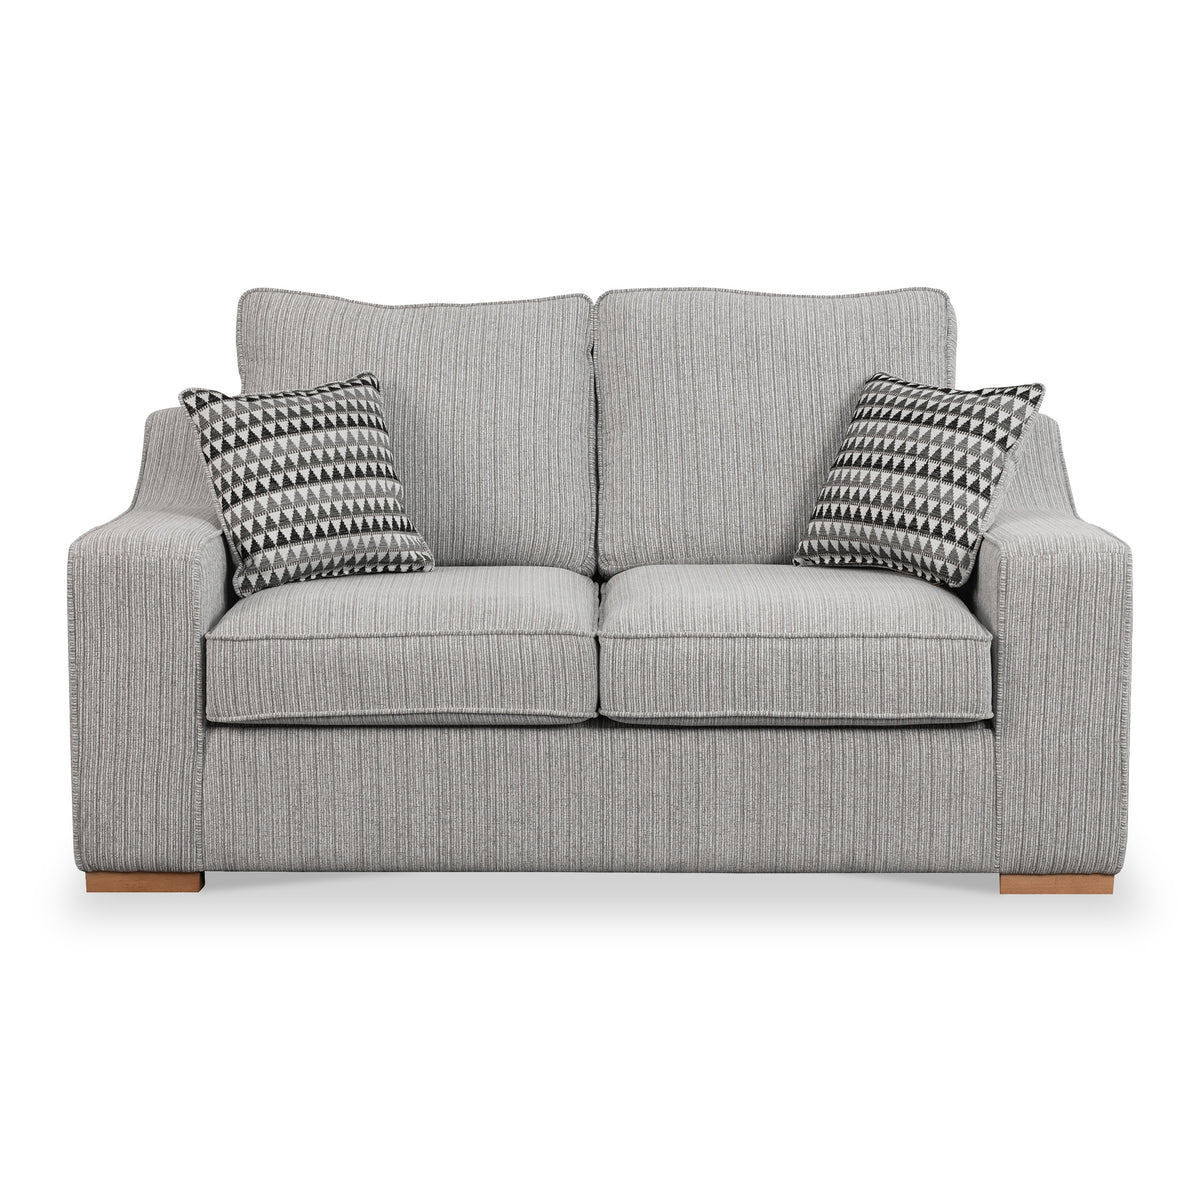 Ashow Silver 2 Seater Sofabed with Maika Dusk Scatter Cushions from Roseland Furniture